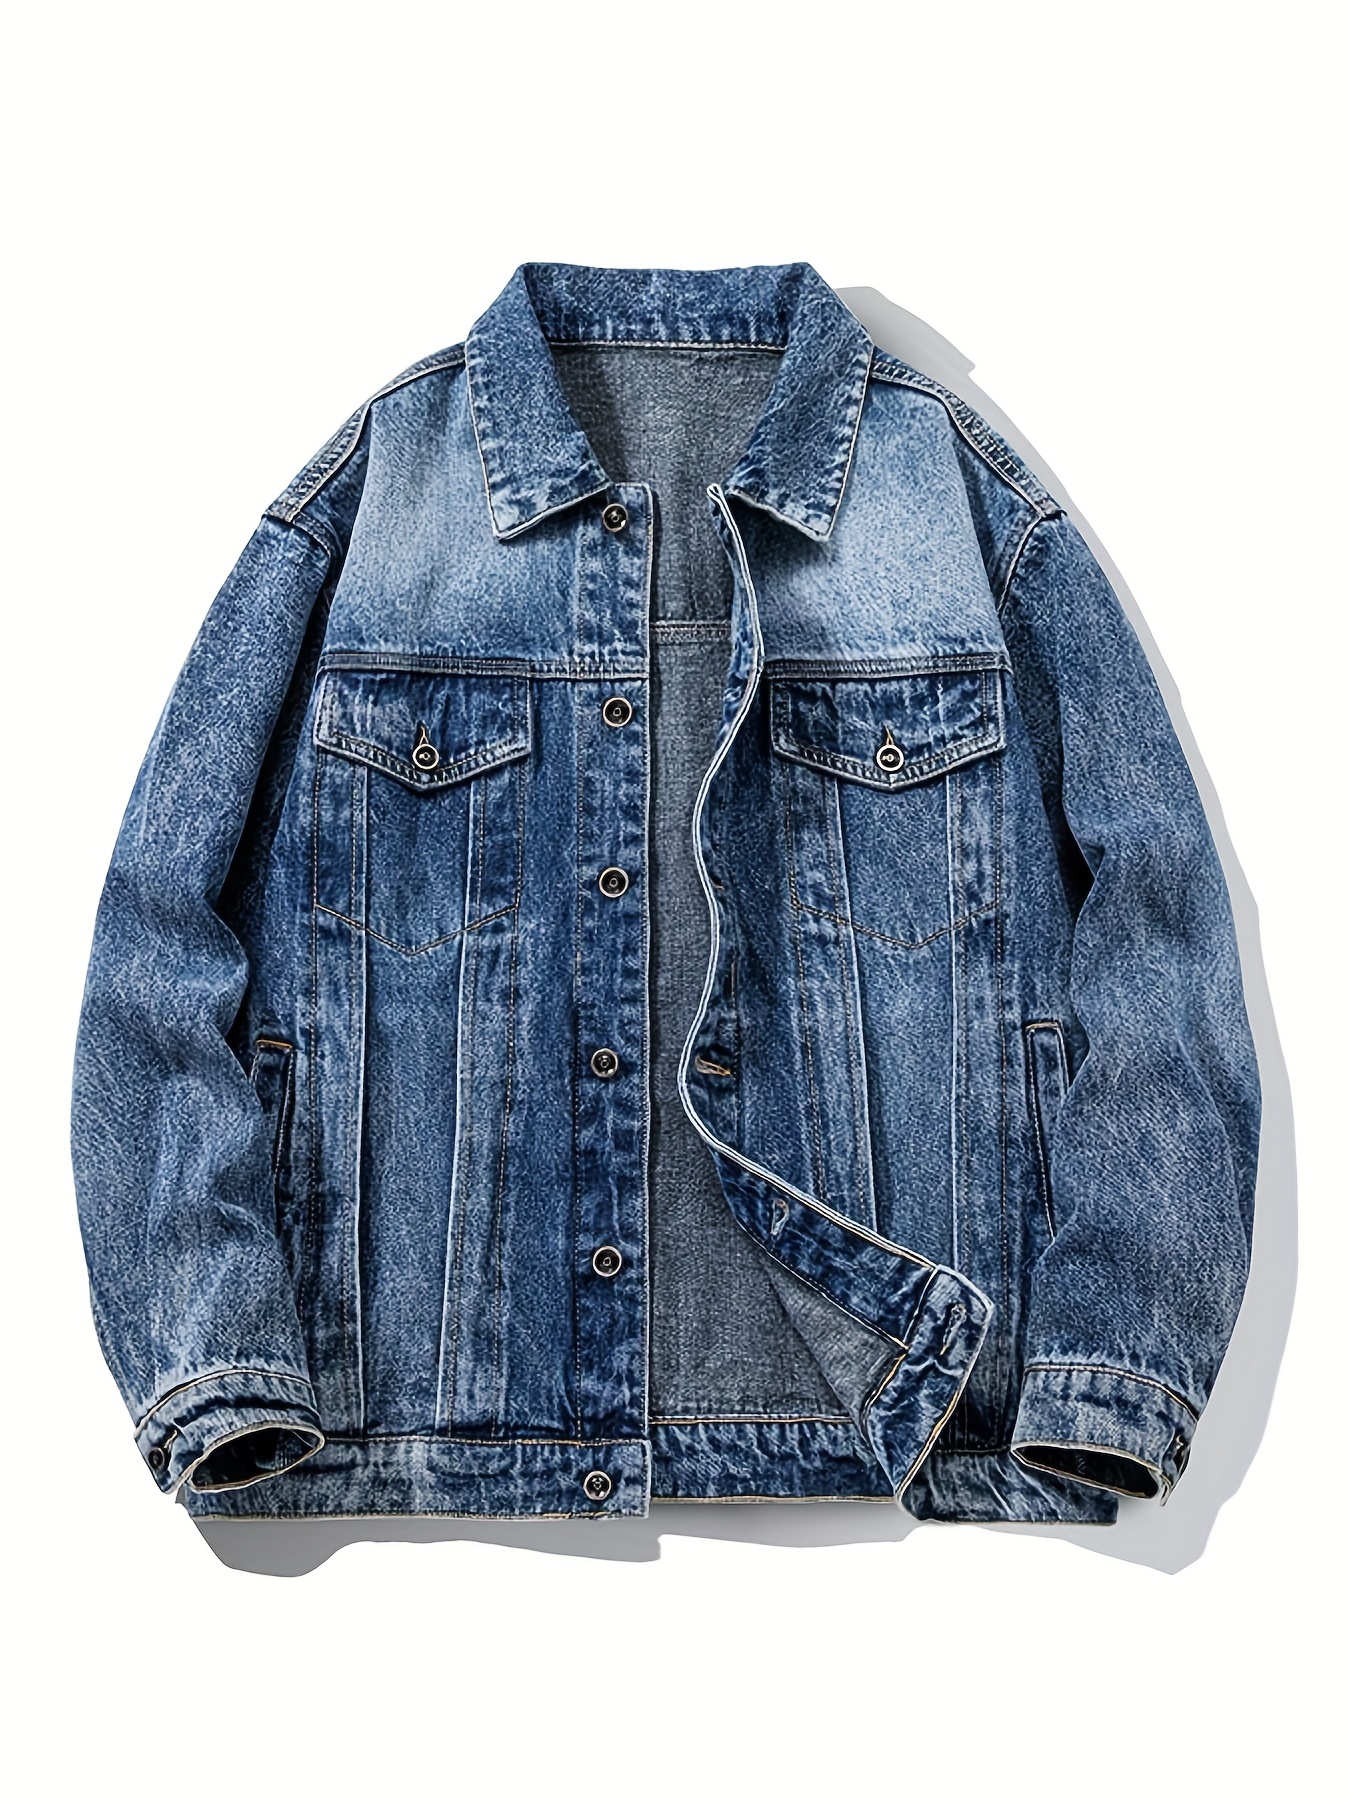 Classic Design Loose Fit Multi Pocket Denim Jacket, Men's Casual Street  Style Lapel Distressed Denim Jackets For Spring Fall